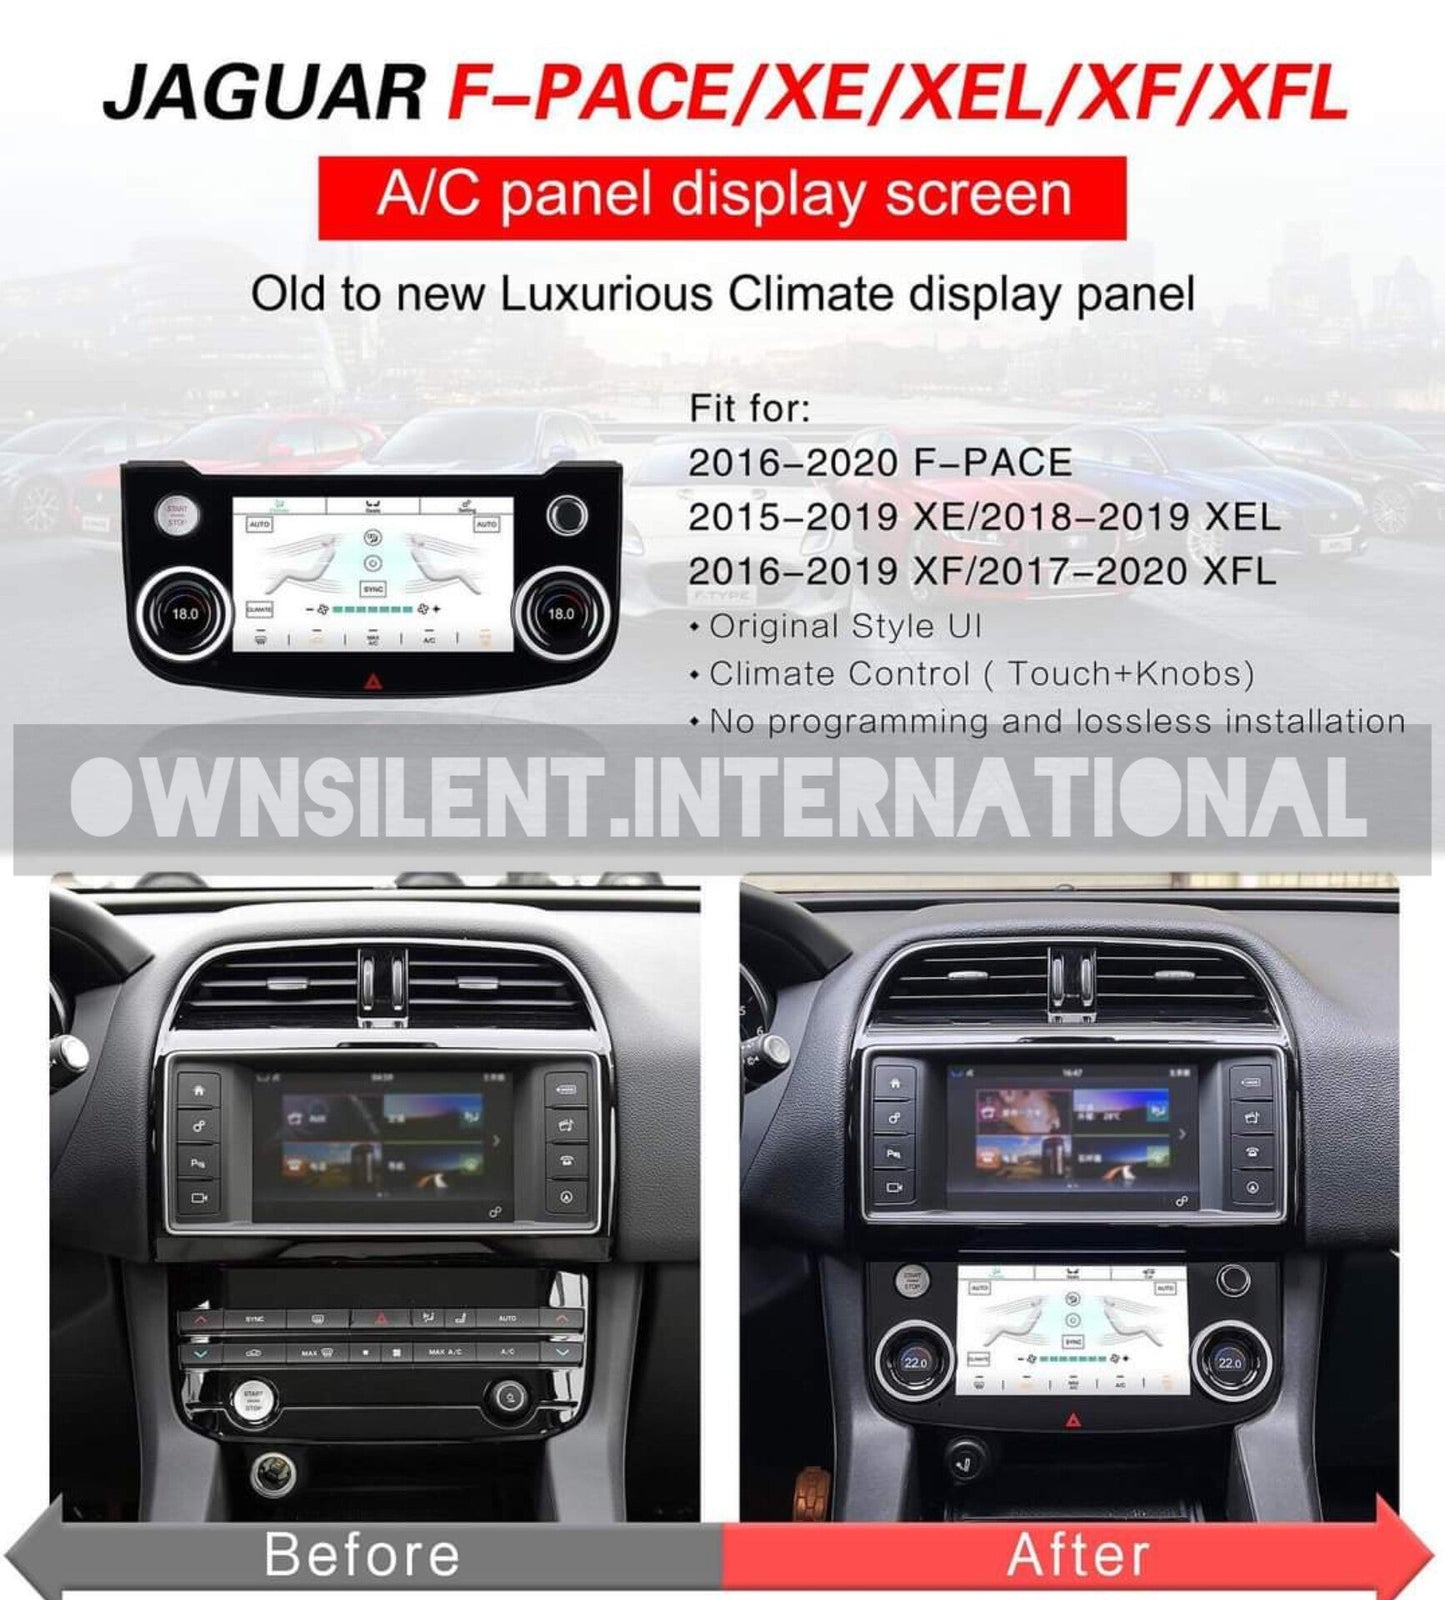 Car Air Board Auto Stereo For Jaguar F-PACE 2016-2020 Android Multimedia DVD Player Headunit Conditioner Digital Screen AC Panel